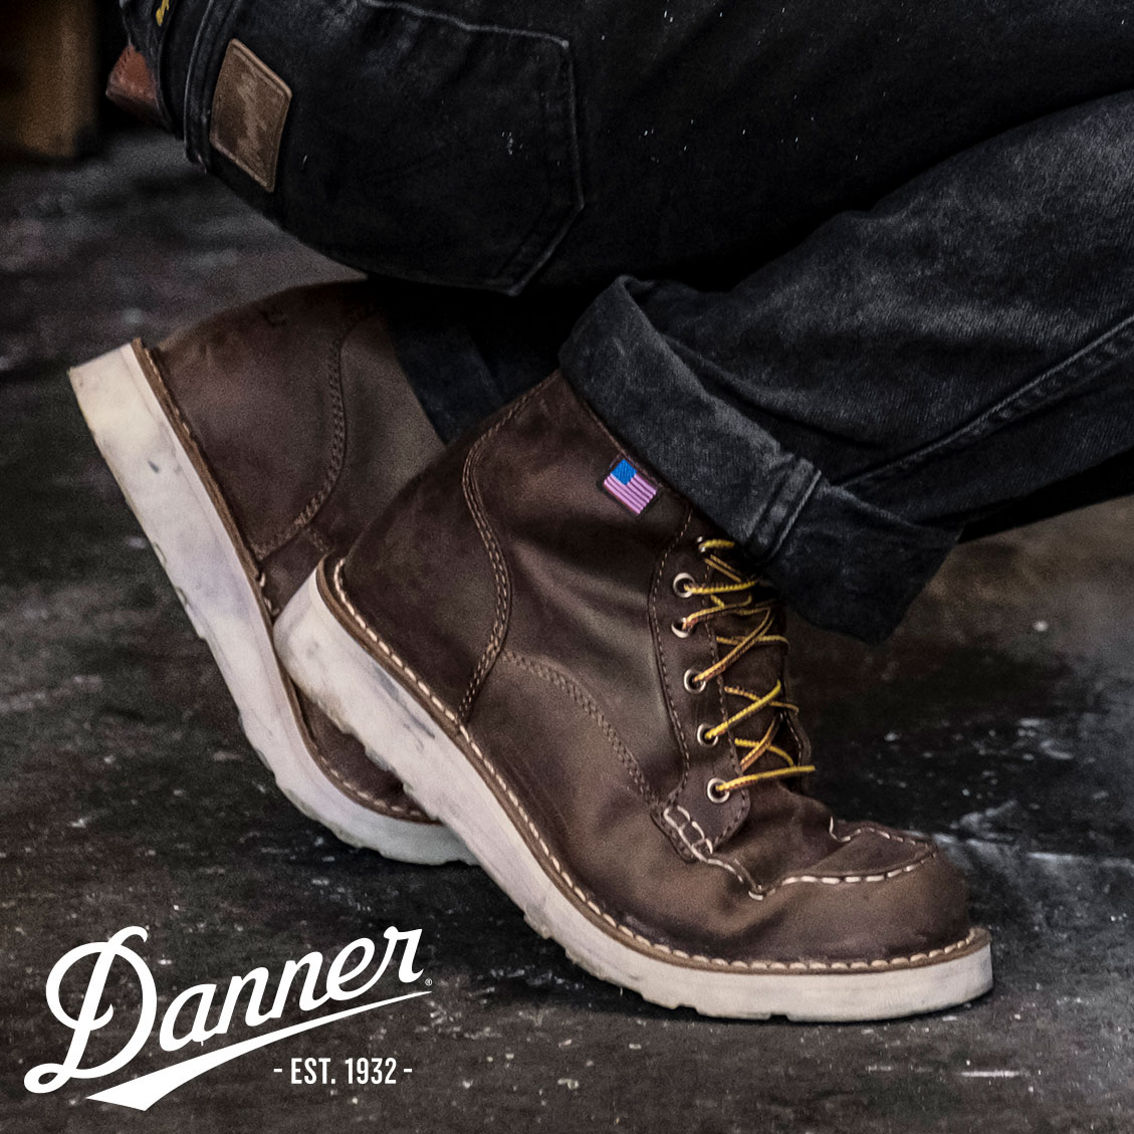 danner boots outlet store